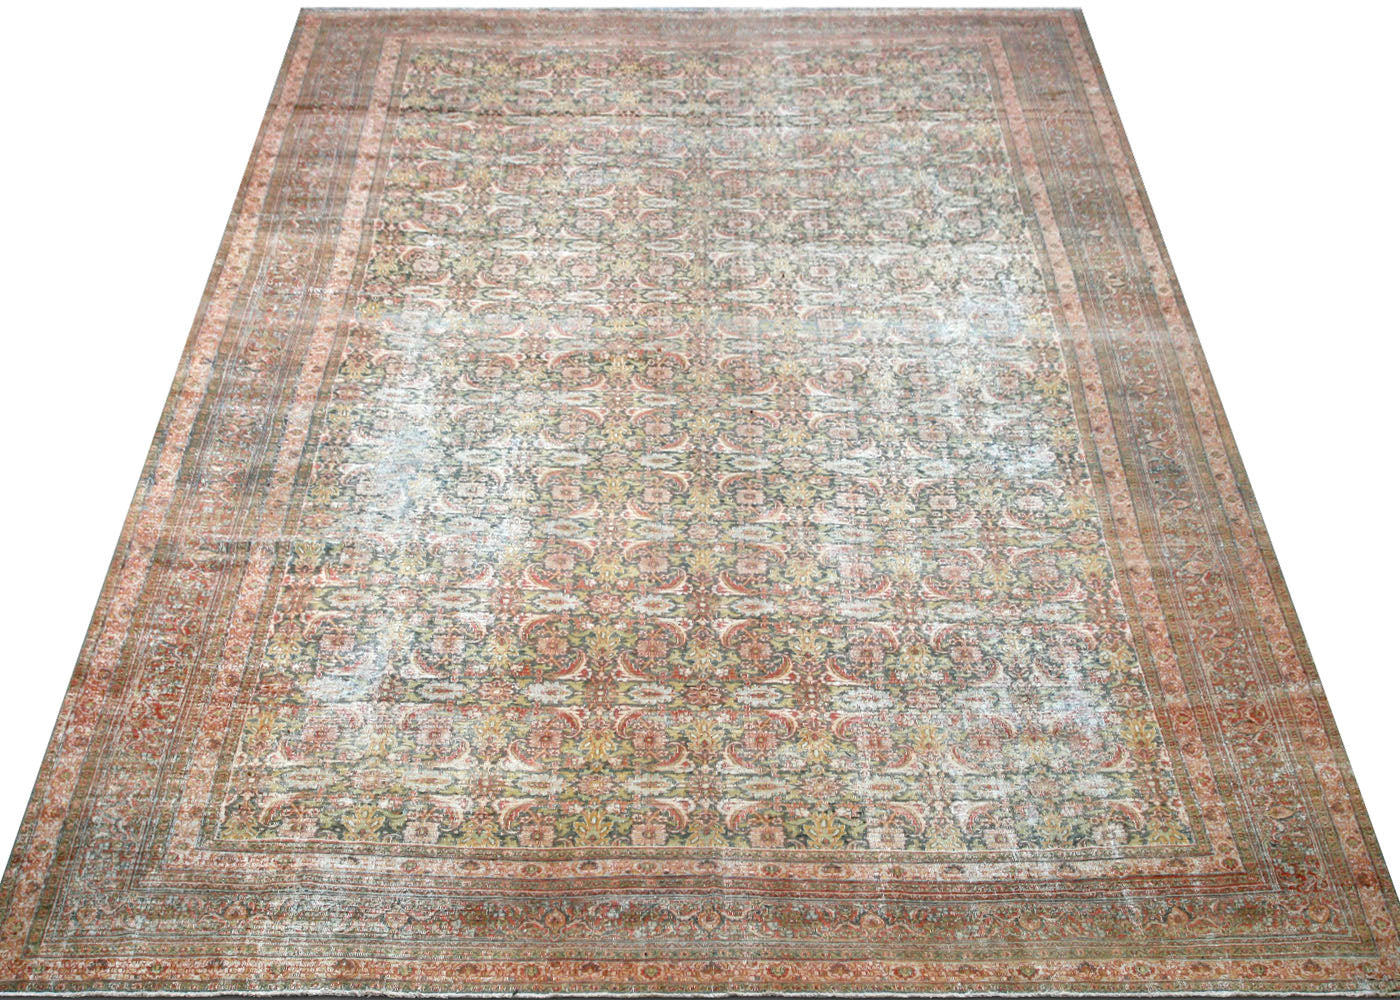 Antique Persian Meshed Rug - 12'6" x 18'2"